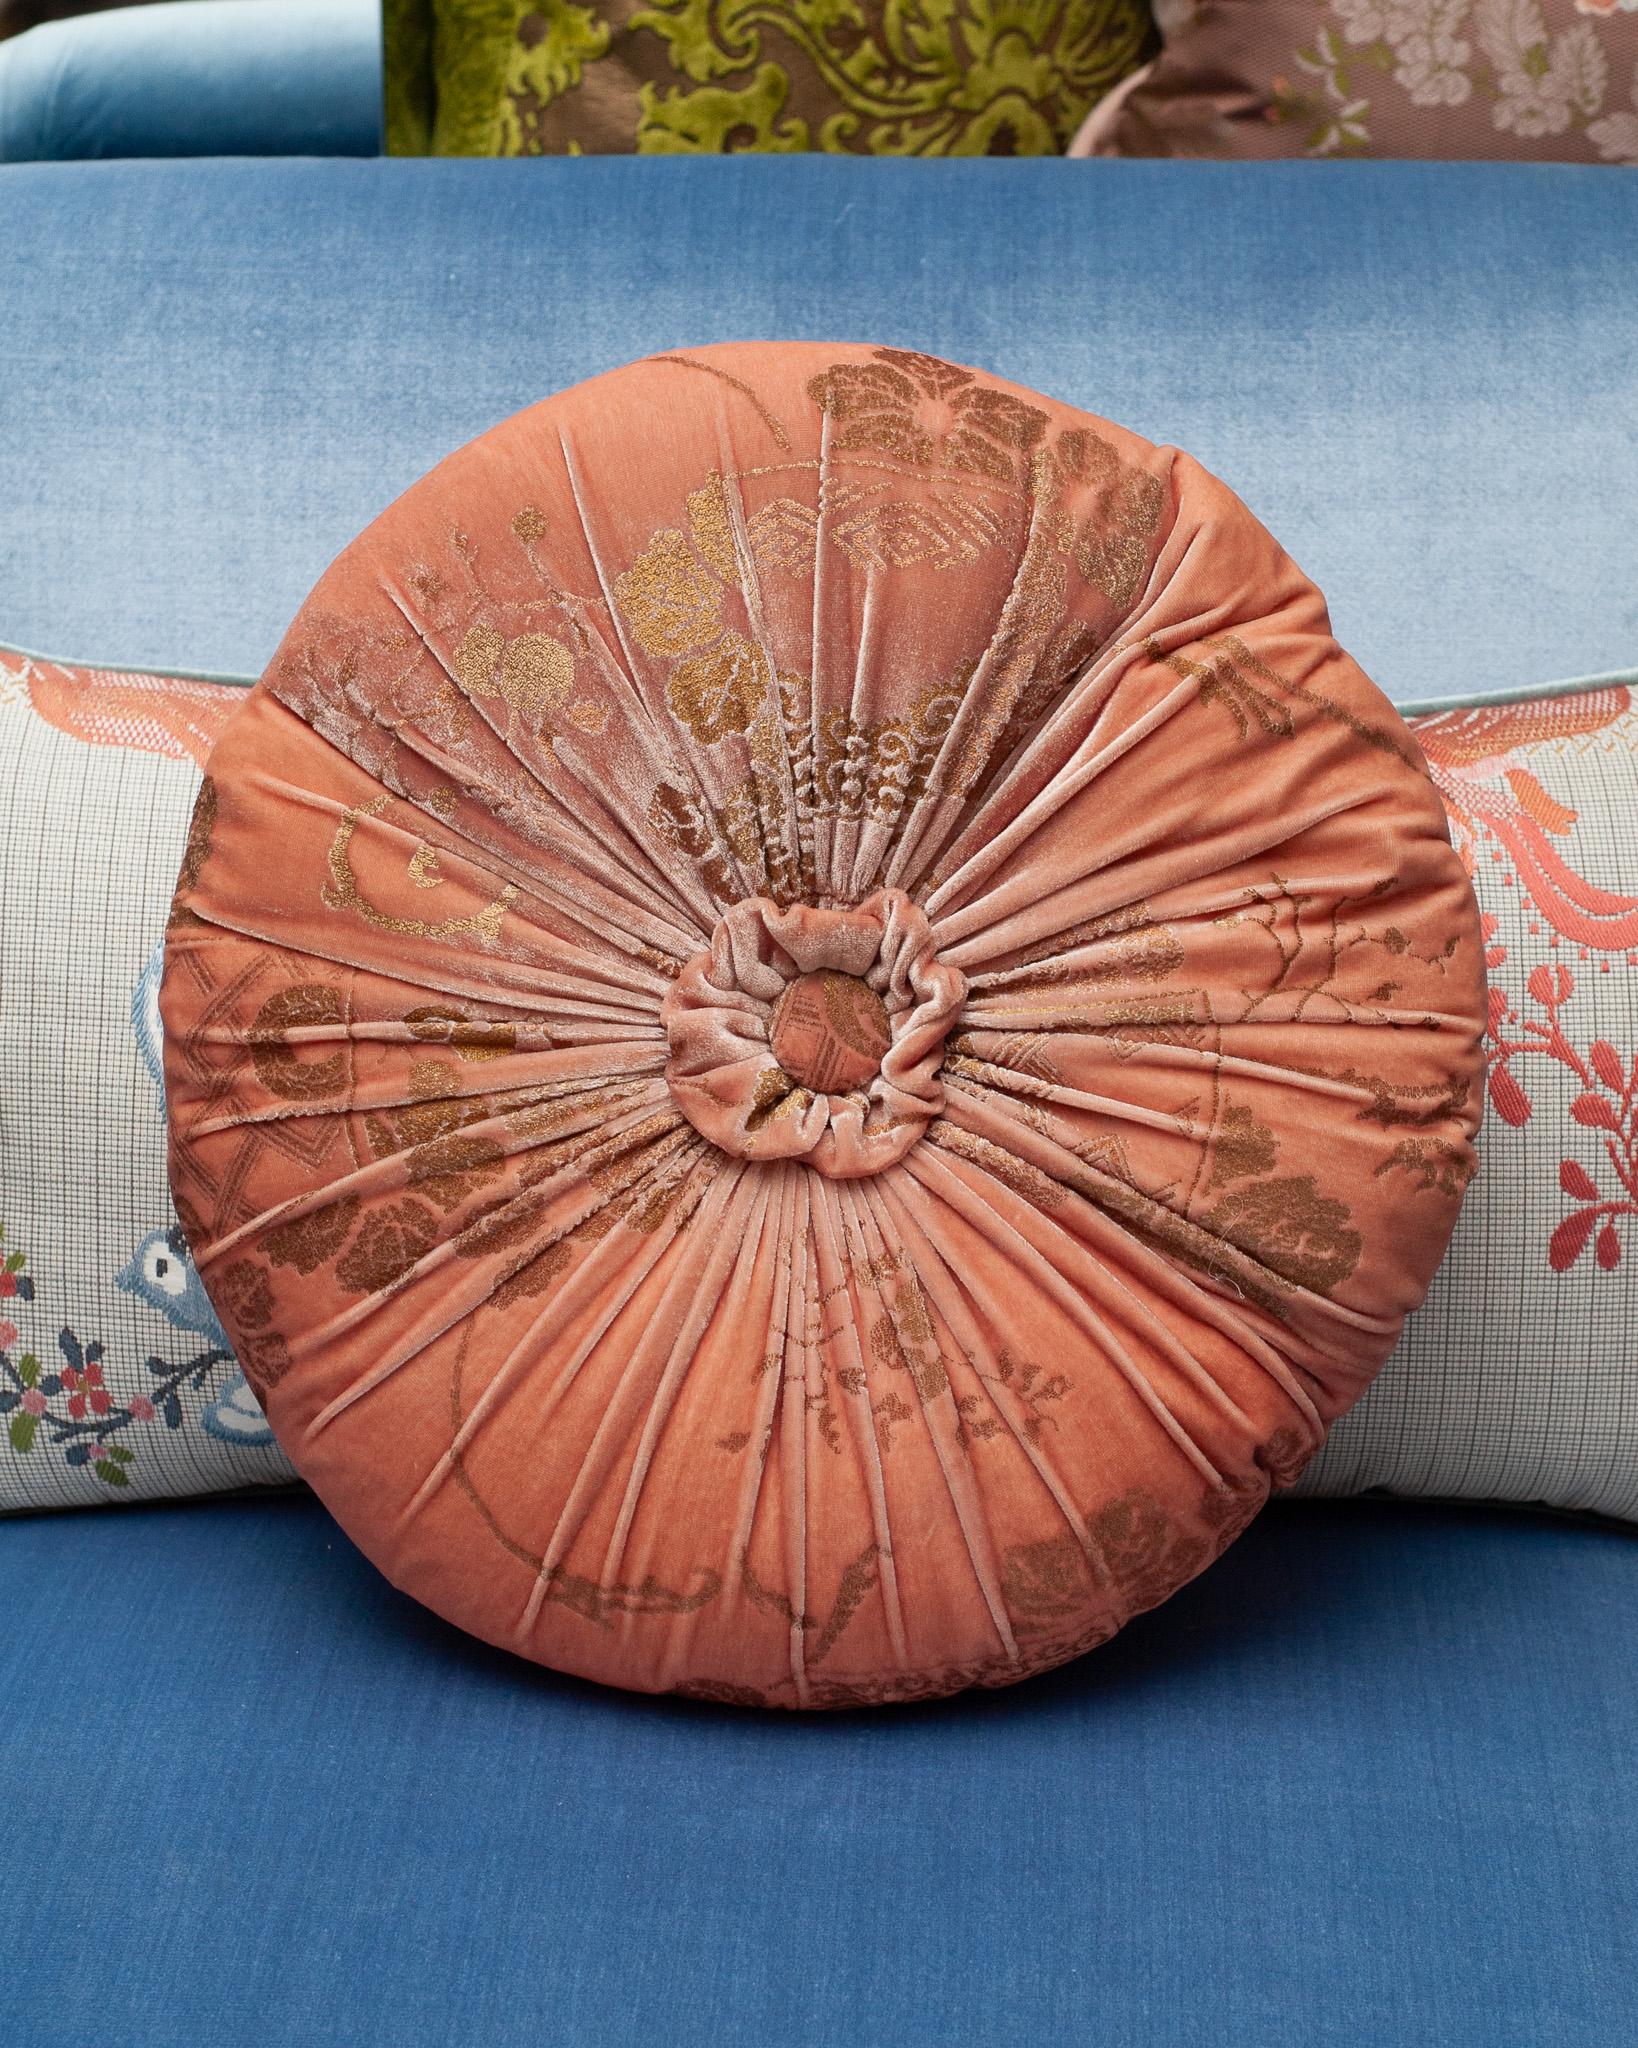 A beautiful Fortuny / Venetia Stadium round pillow with pleats and a center tuft in soft pink velvet with gold, made in Venice.

Mario Fortuny was born in 1871 in Granada Spain and after a childhood marked by the premature death of his father he